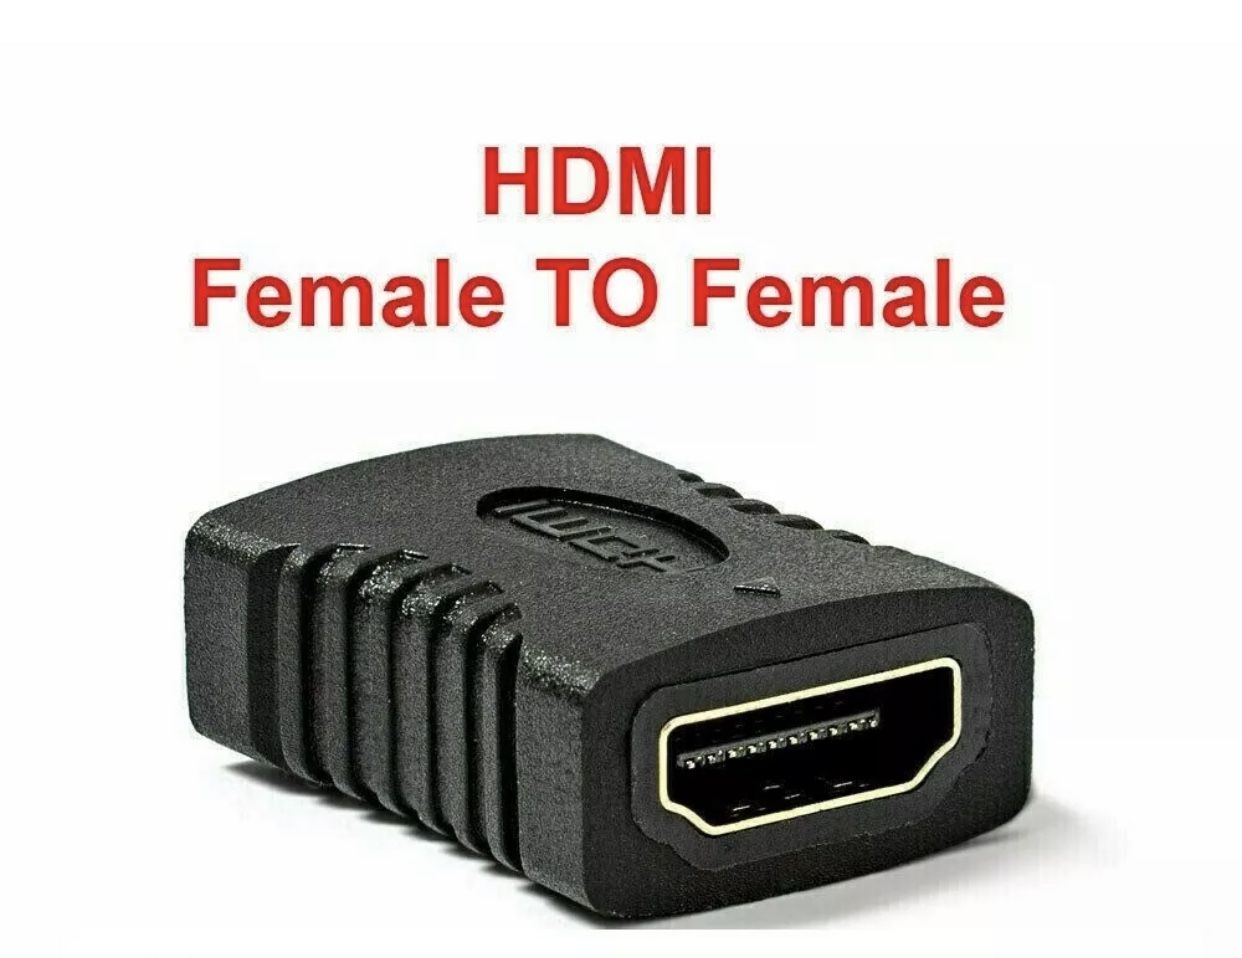 HDMI Female to HDMI Female Coupler Connector 